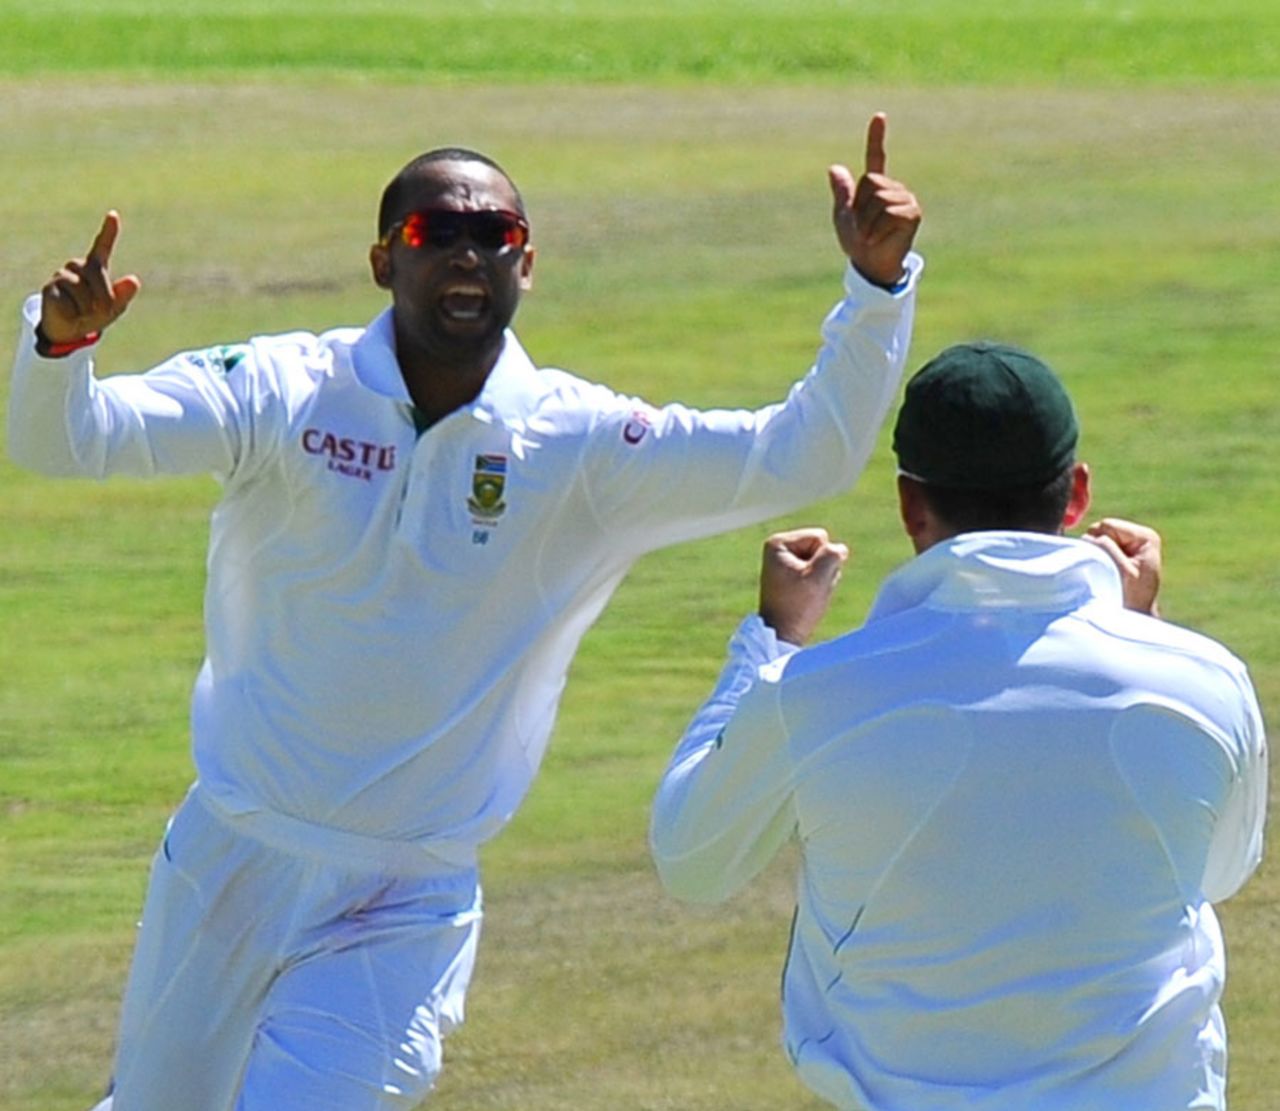 Robin Peterson is pumped up after the wicket of Misbah-ul-Haq, South Africa v Pakistan, 2nd Test, Cape Town, 4th day, February 17, 2013